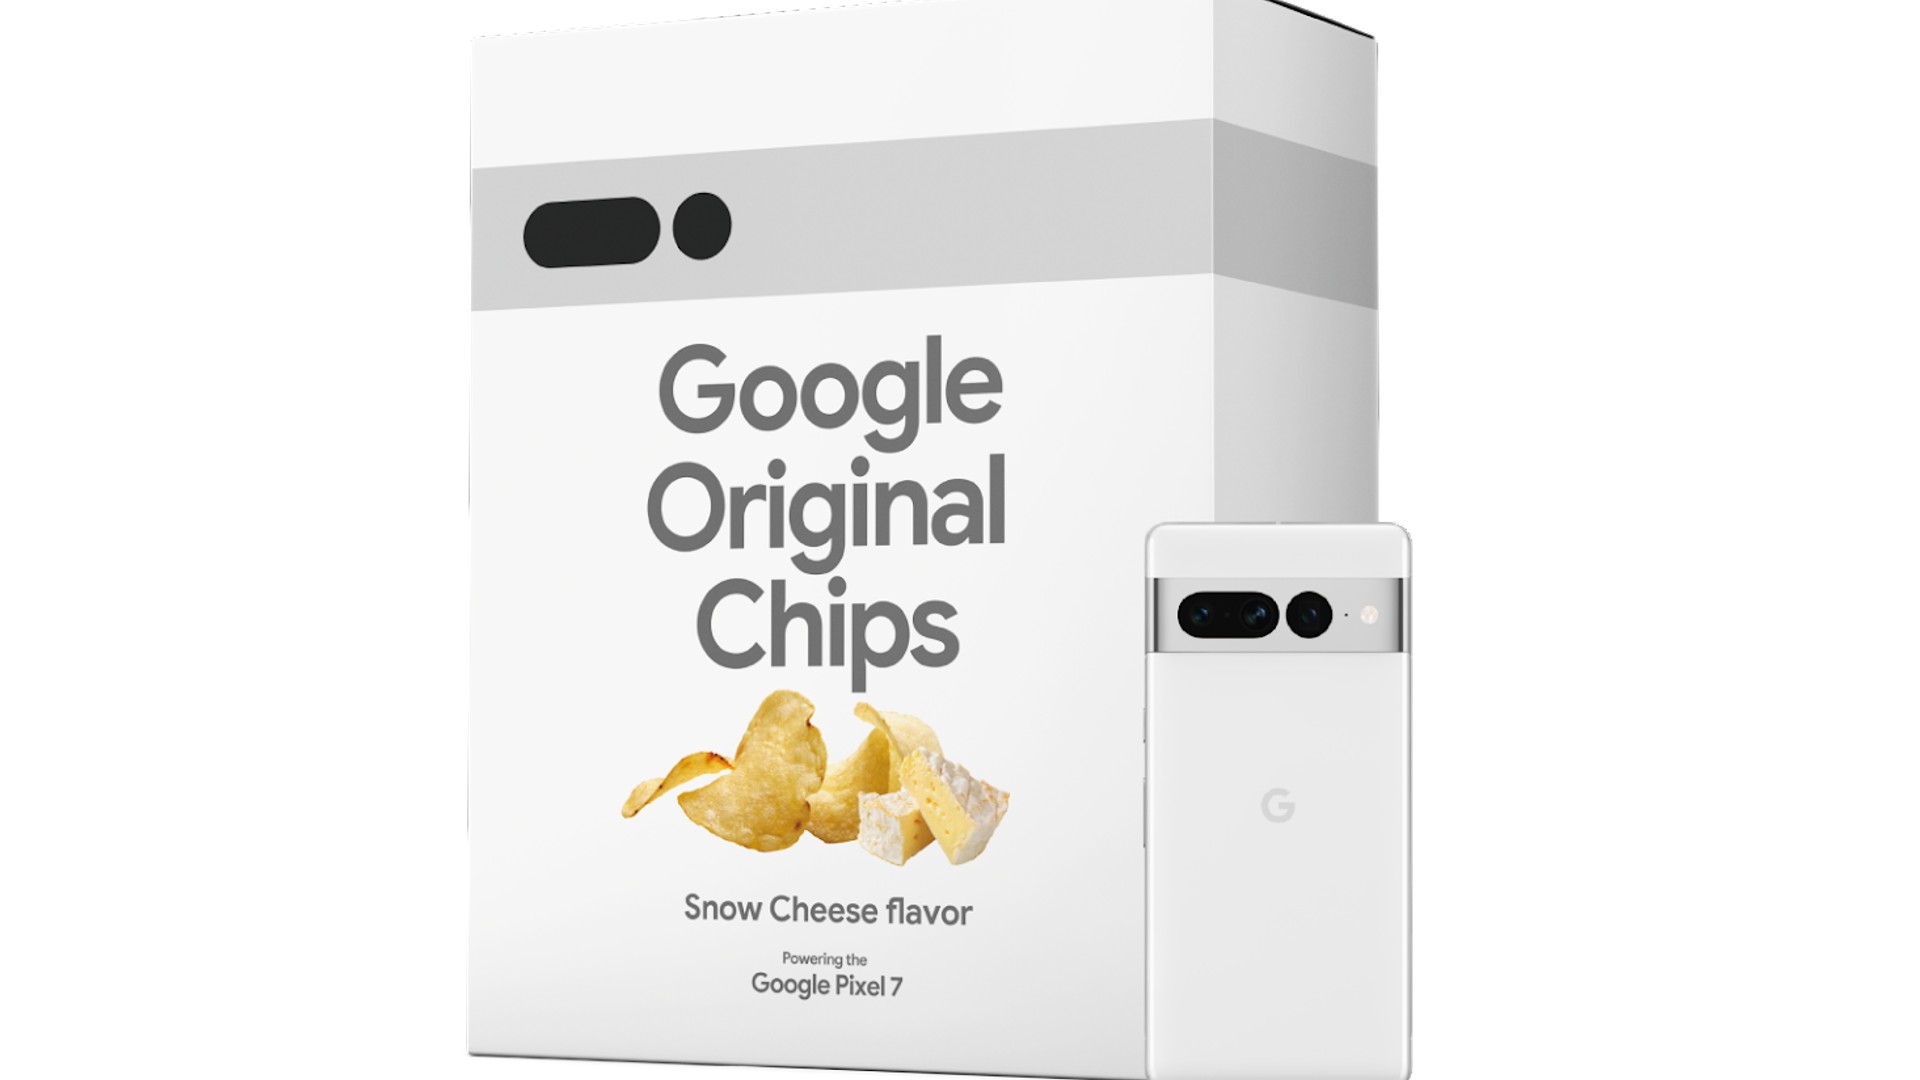 Google released exclusive chips with the "taste" of Pixel 7 and Pixel 7 Pro